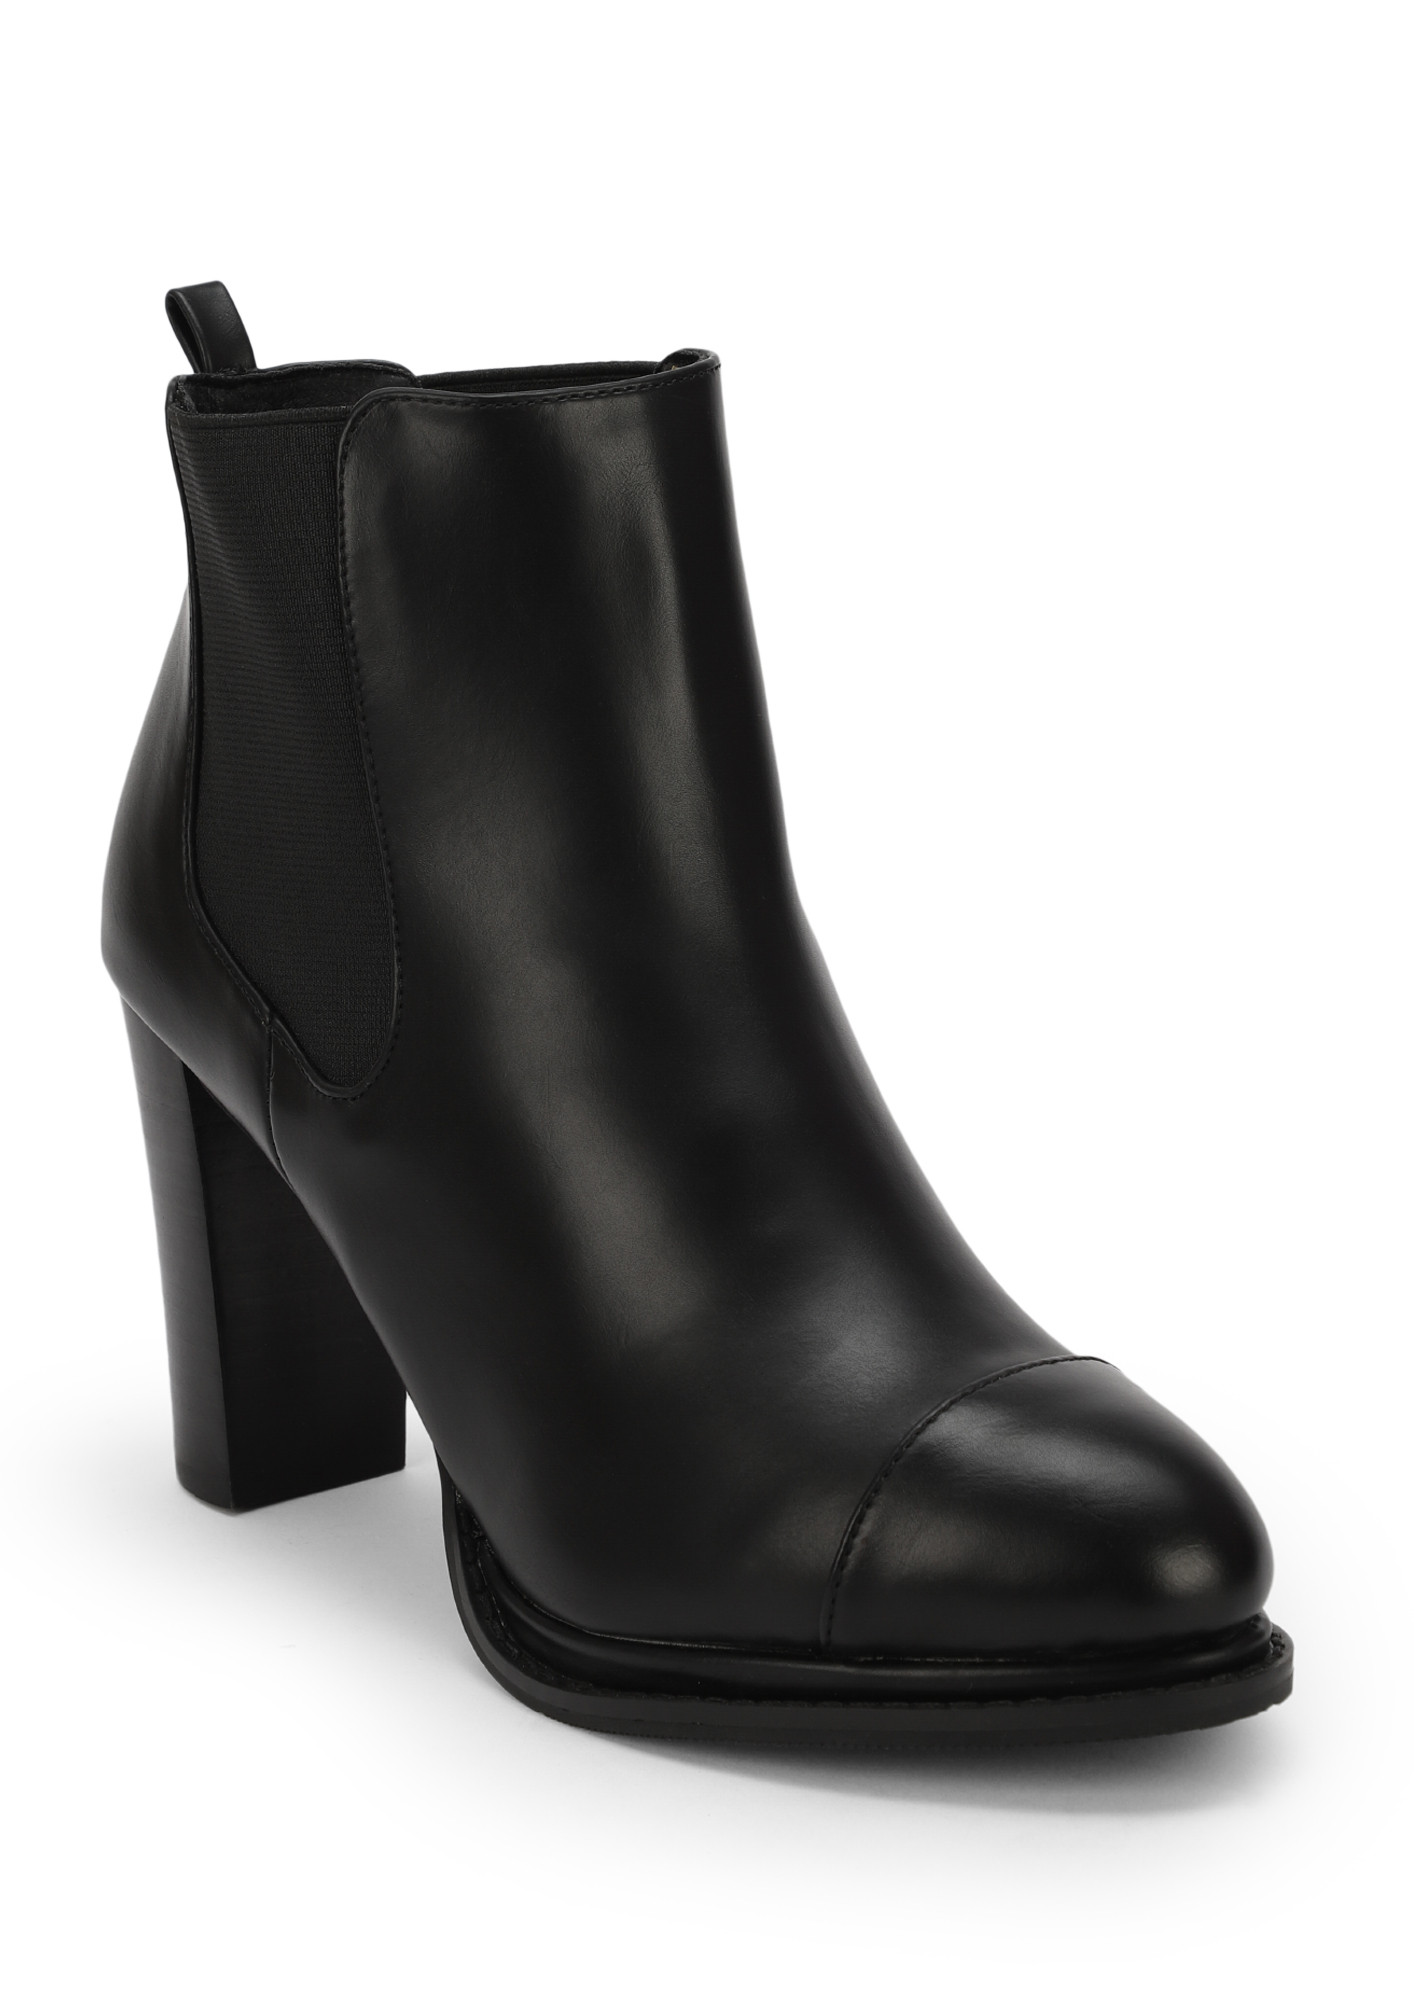 WORK READY BLACK ANKLE BOOTS